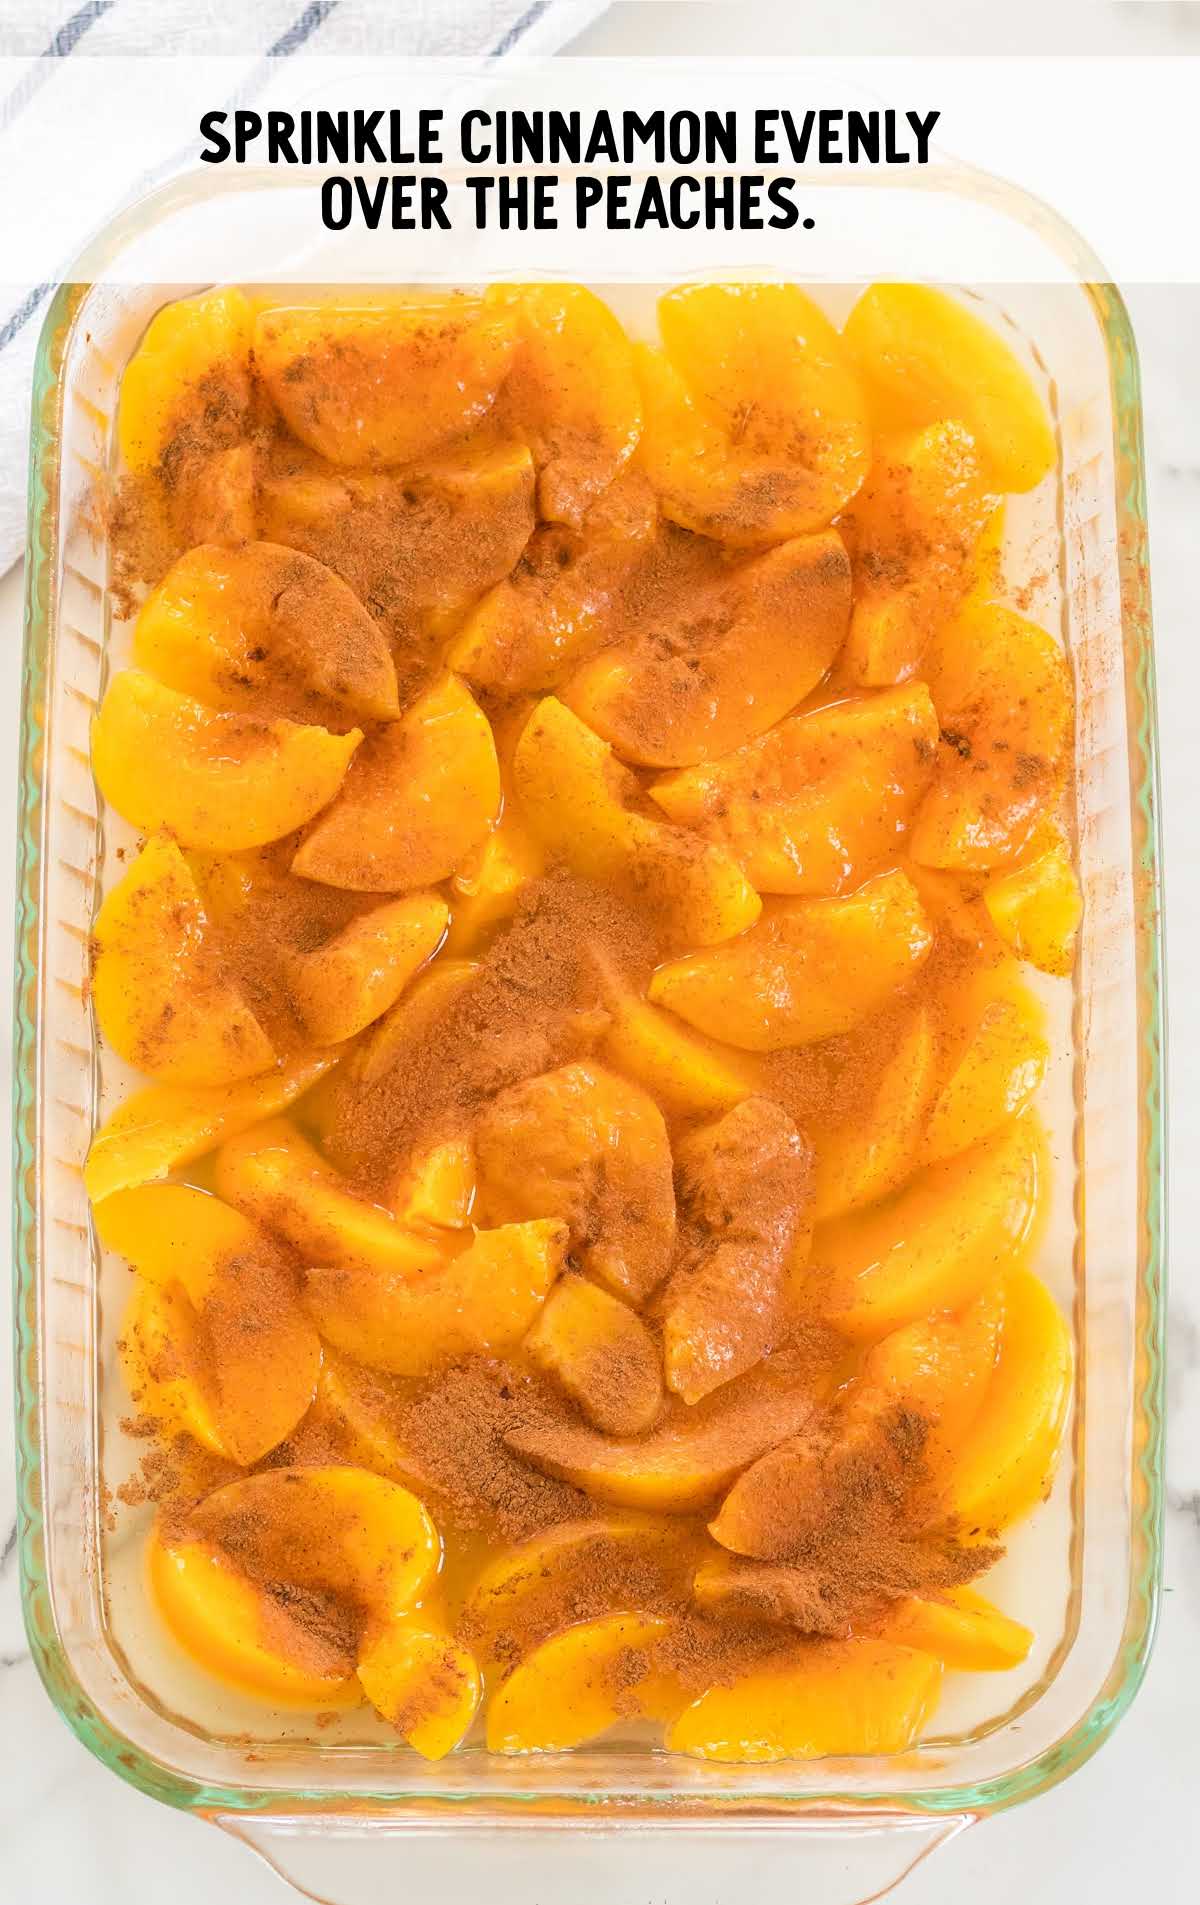 cinnamon sprinkled on top of the peaches in the baking dish